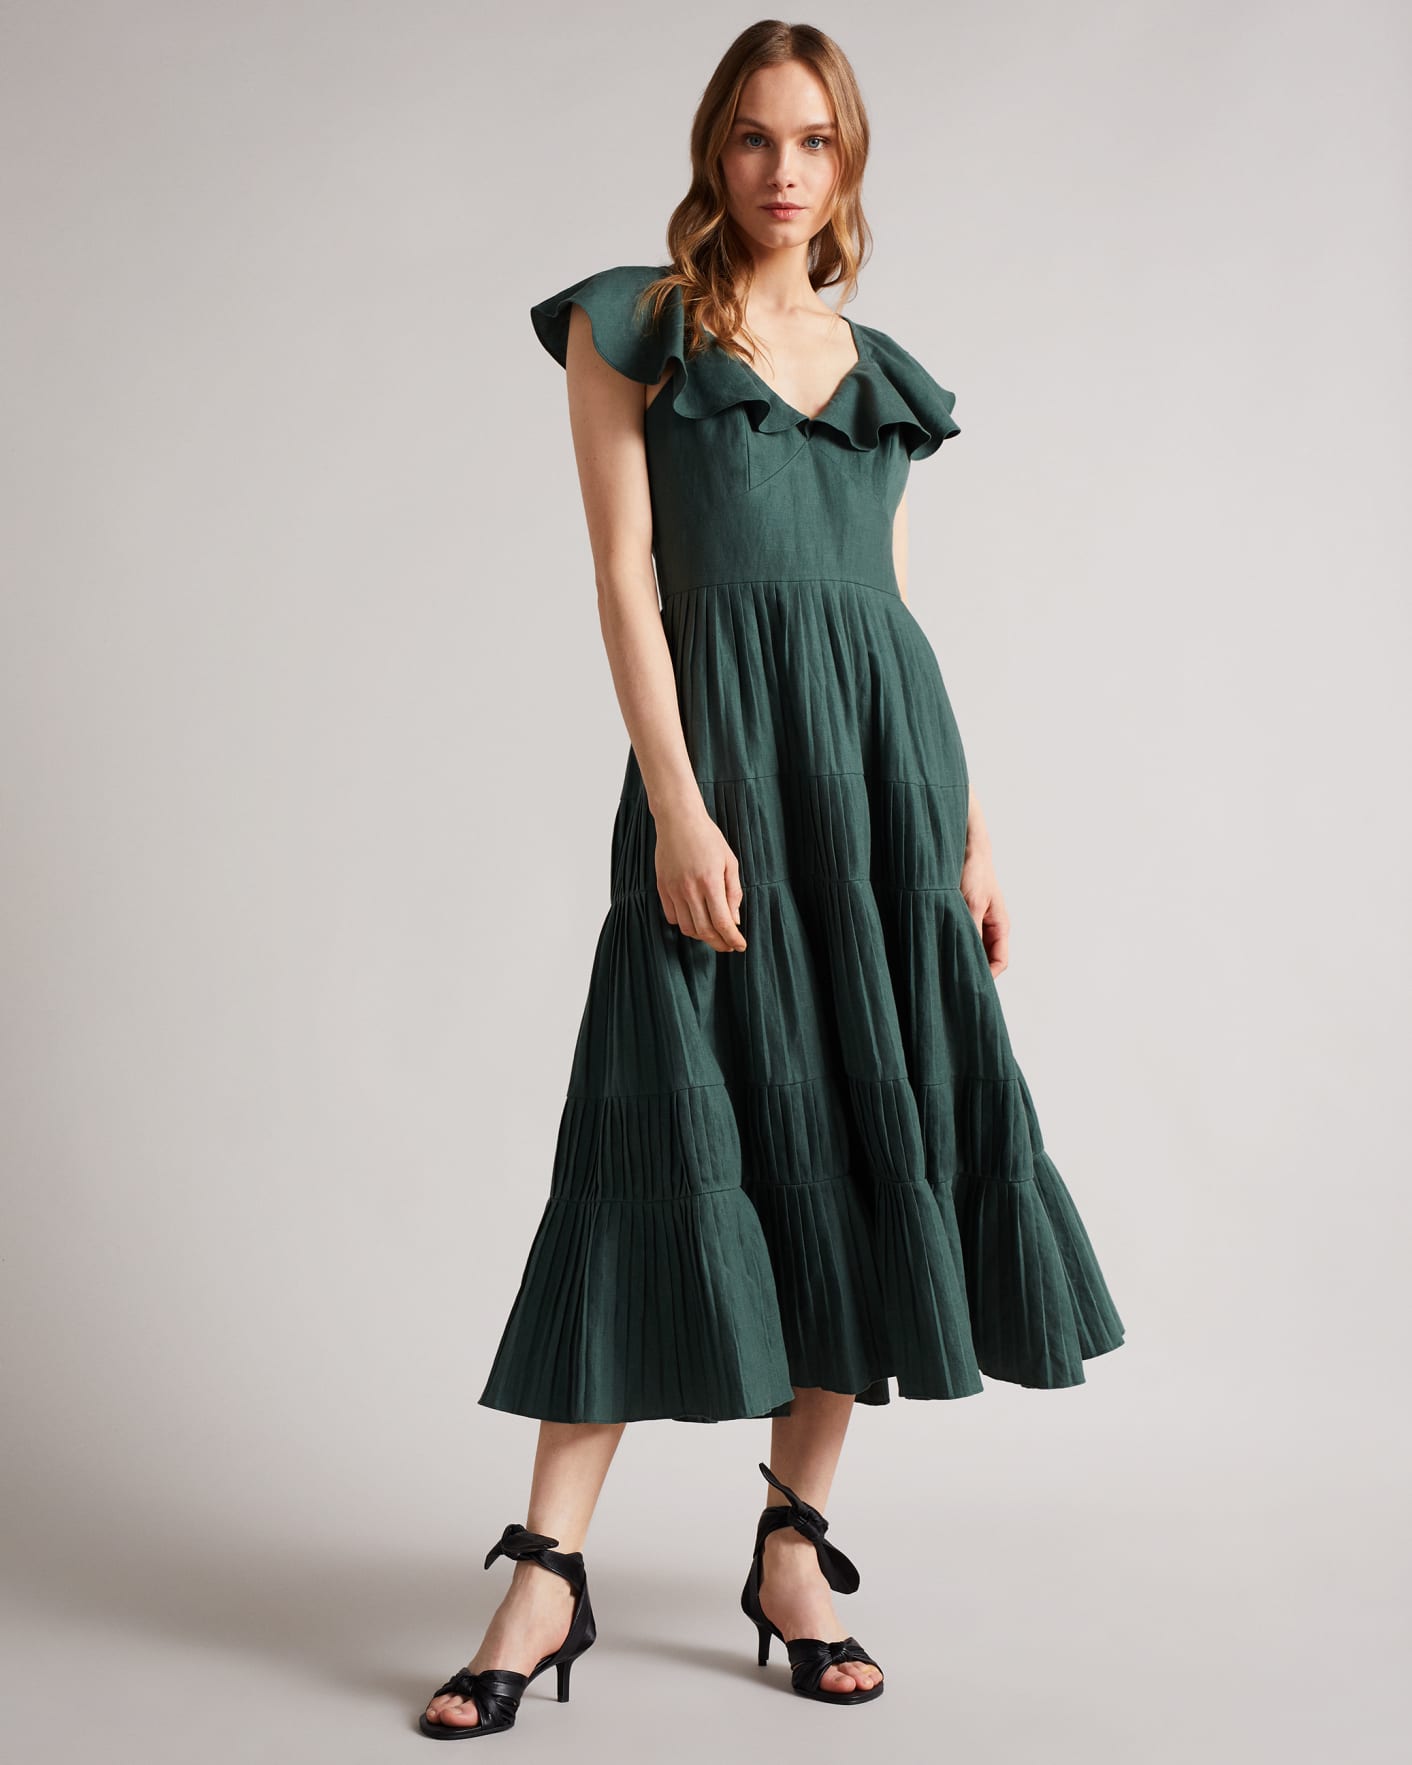 Teal-Blue Exaggerated Ruffle Midi Dress Ted Baker